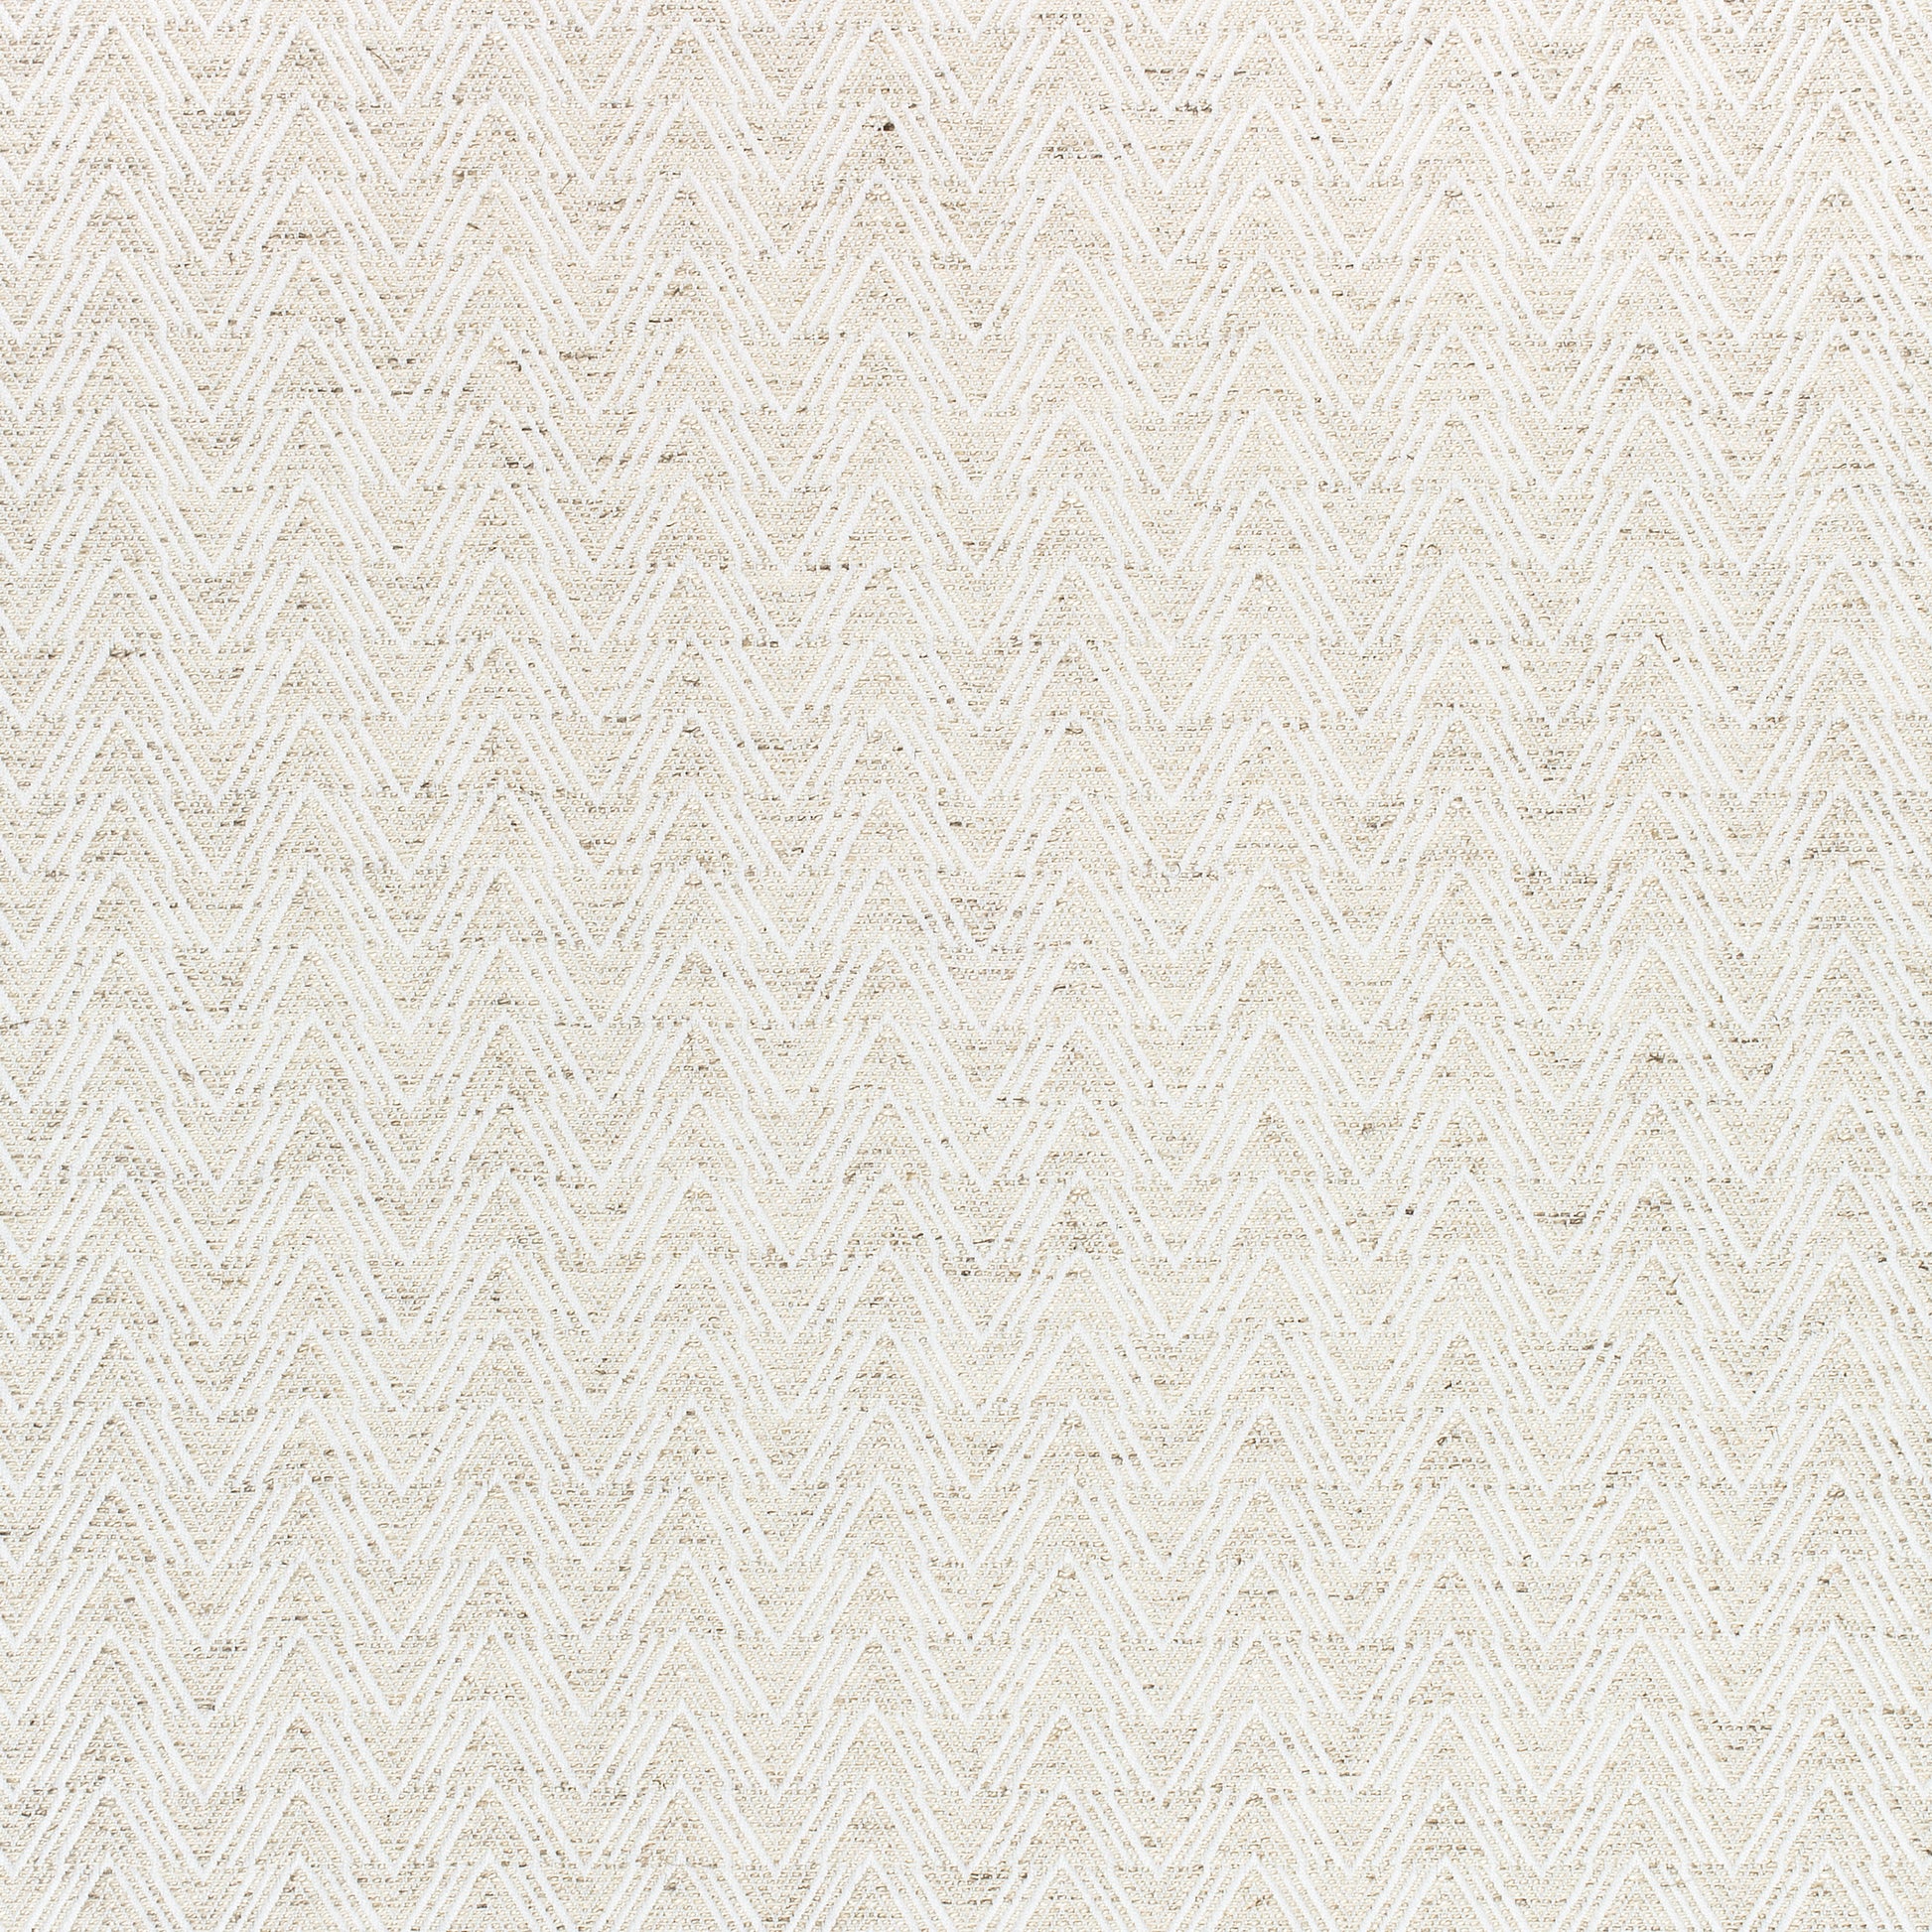 Purchase Thibaut Fabric Product W80647 pattern name Gatsby color Flax